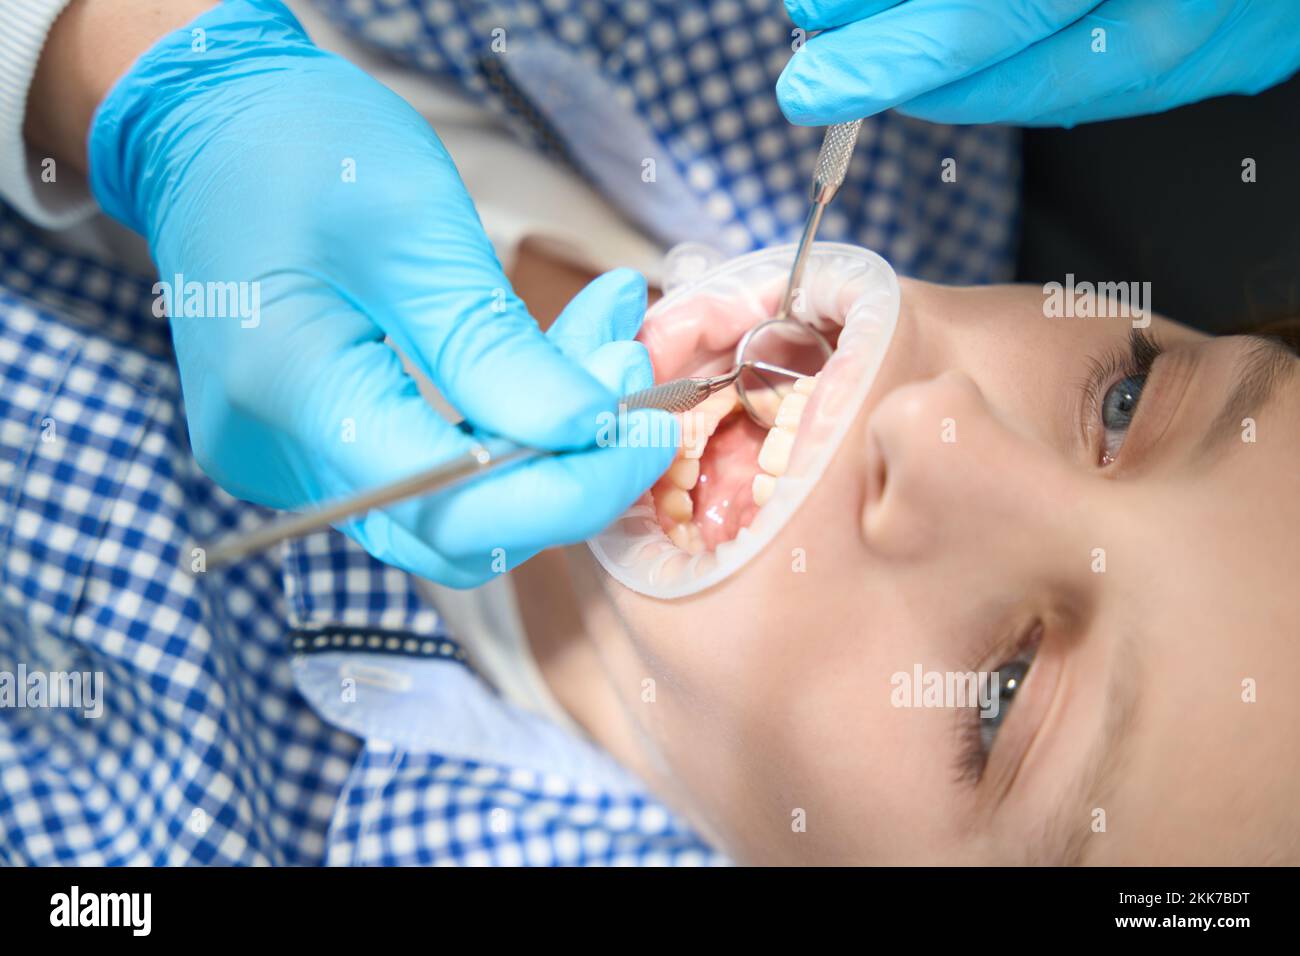 Dentist performs a professional oral hygiene procedure to young patient Stock Photo